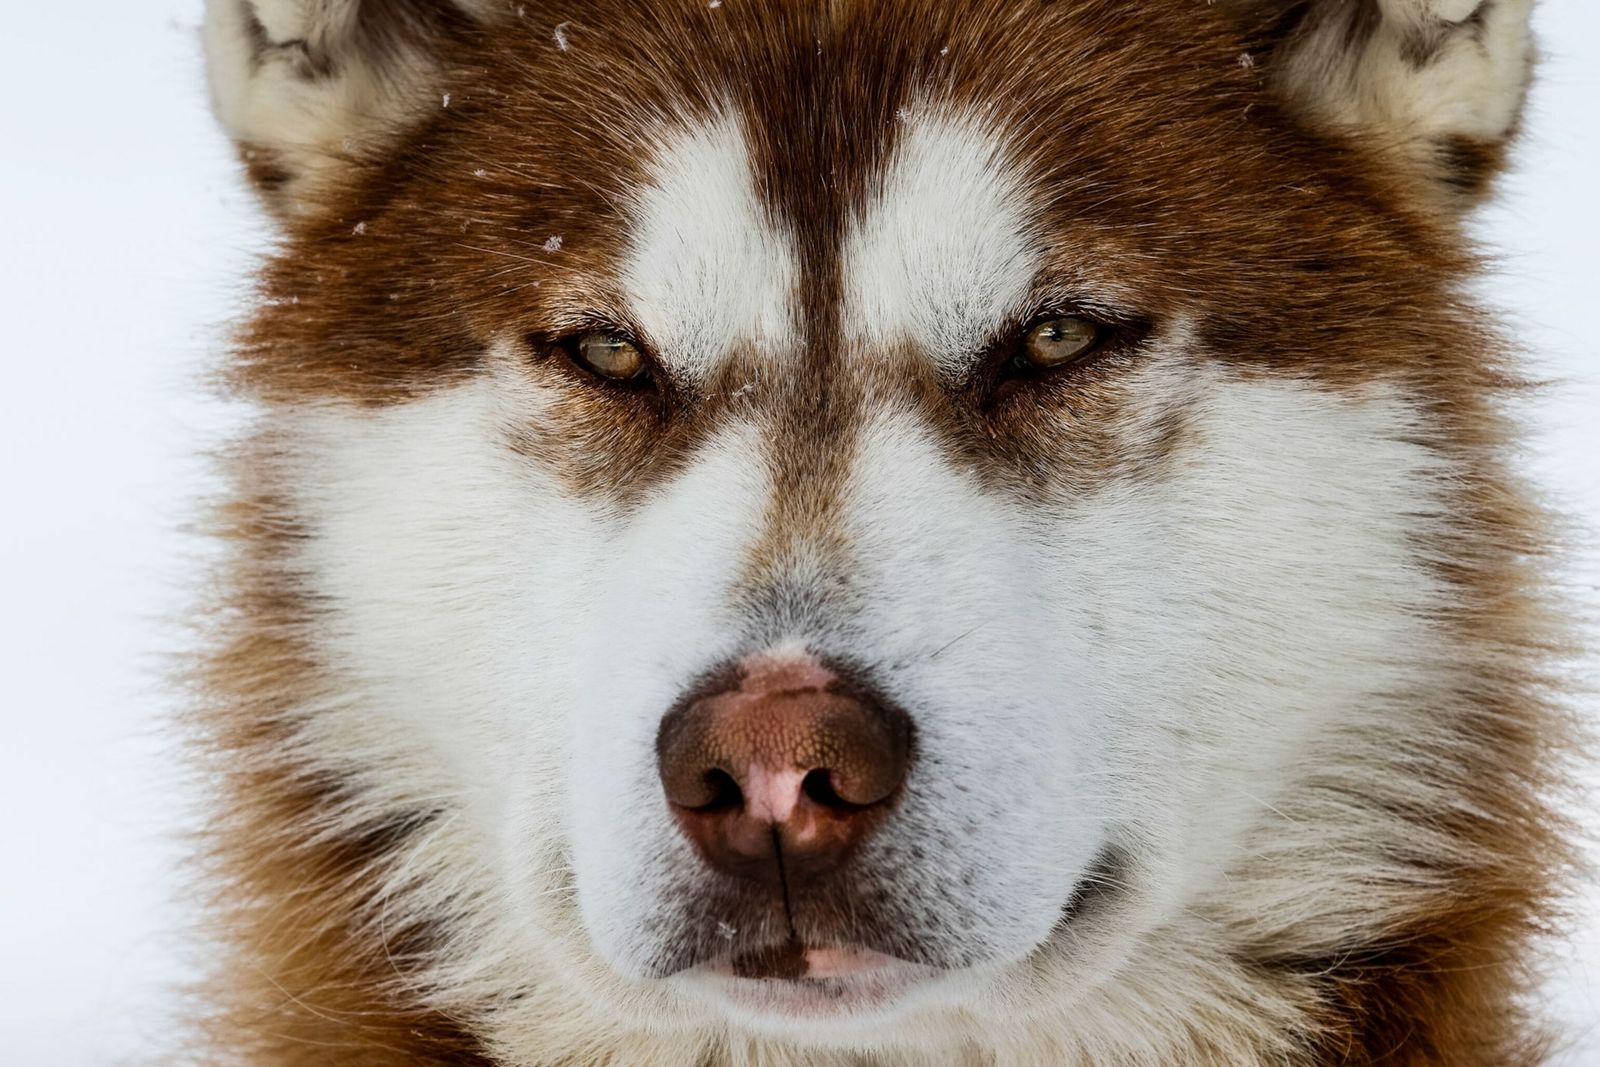 Discovered in Alaska: The oldest dog in the United States